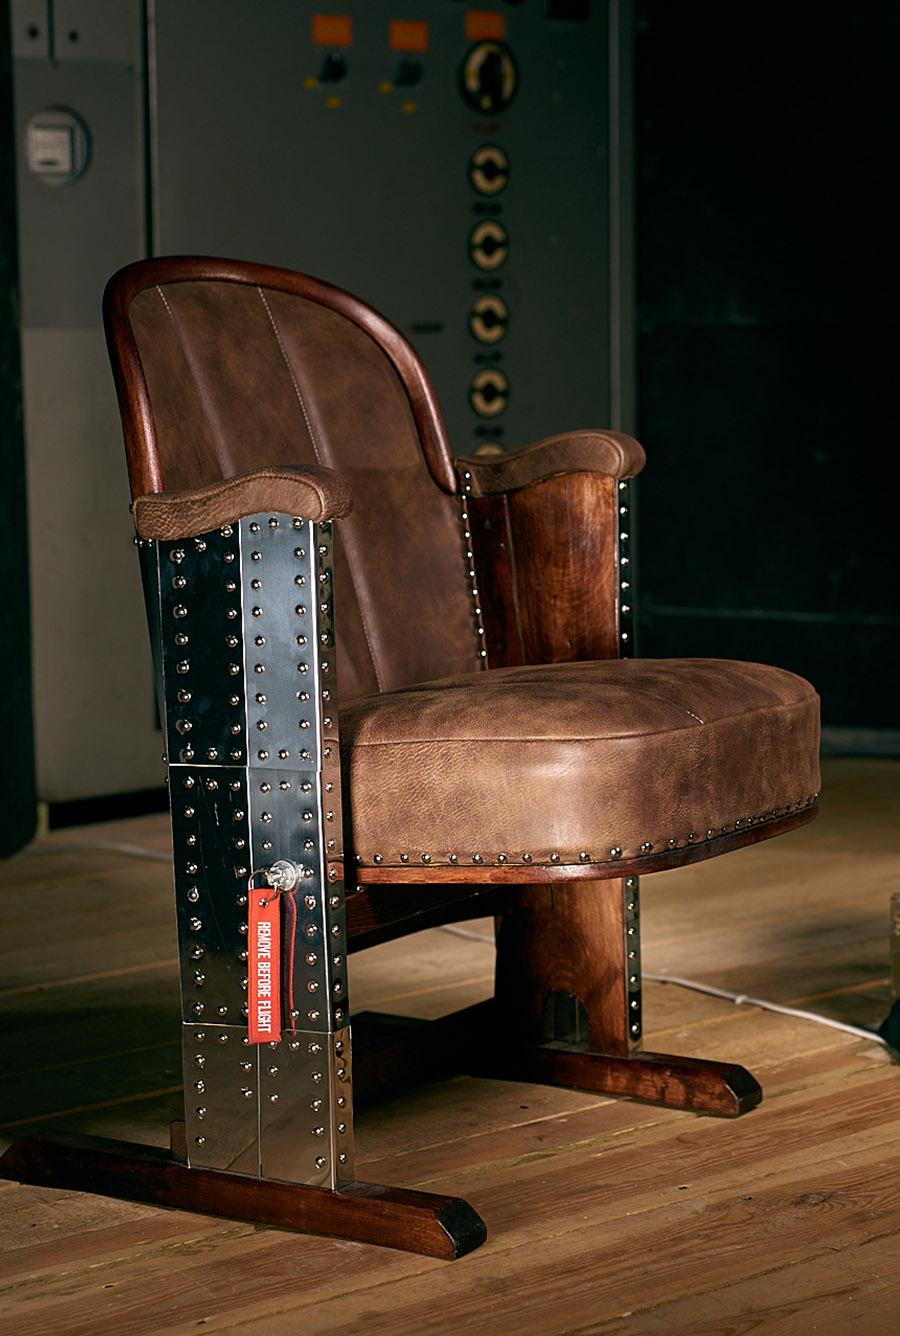 Description
Original, authentic wooden cinema armchair made in Poland in the 1950s.

Construction
Wooden structure – sides, armrests and legs made of solid wood; profiled backrest and seat plate made of multilayered plywood. The seating part is